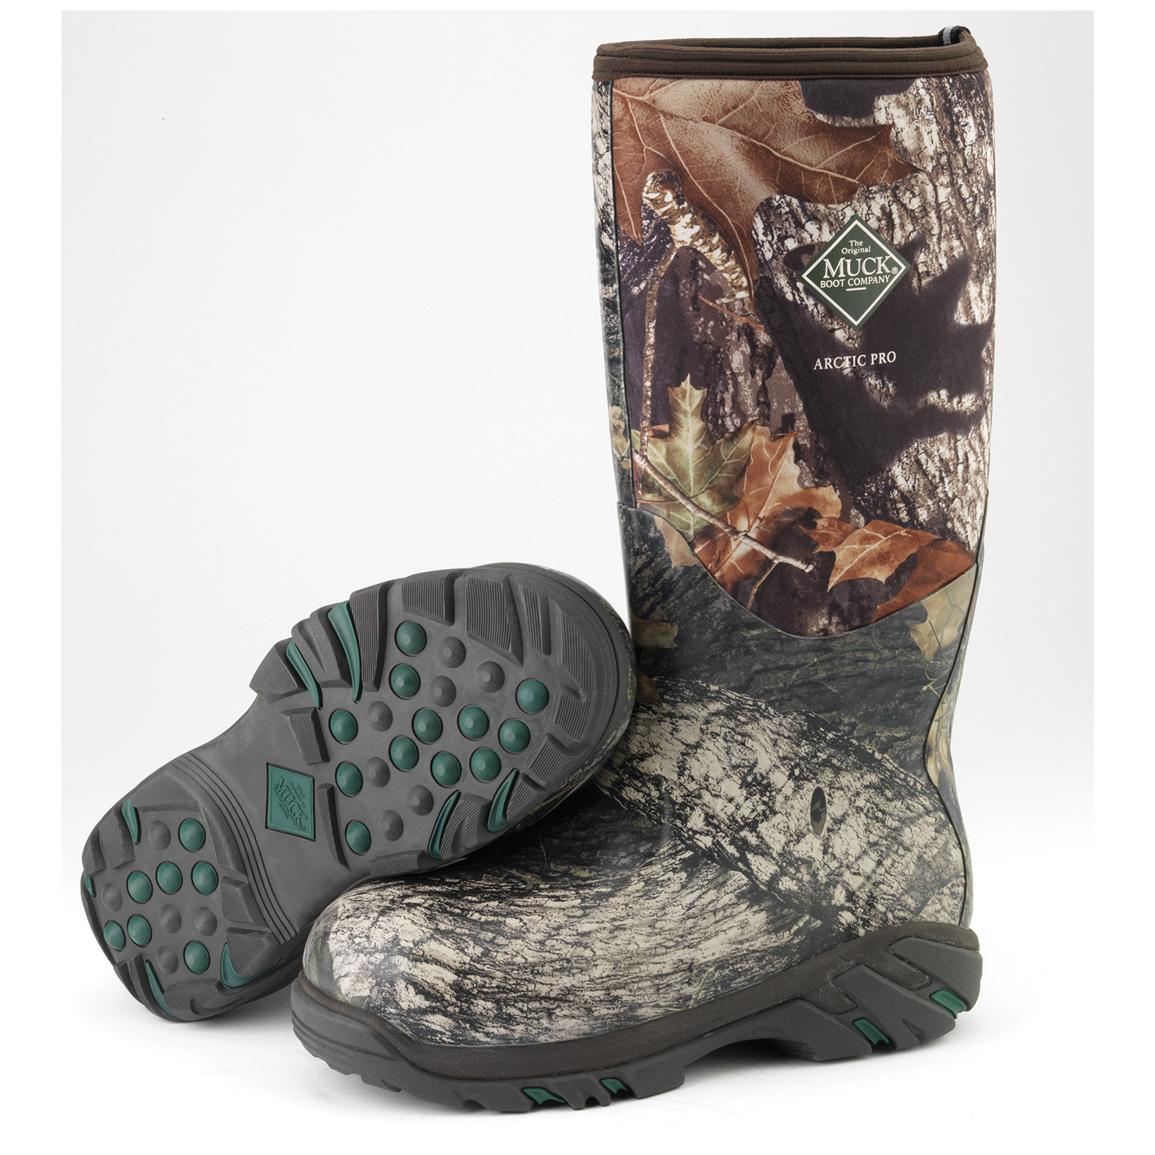 Camo Muck Boots Sale - Yu Boots